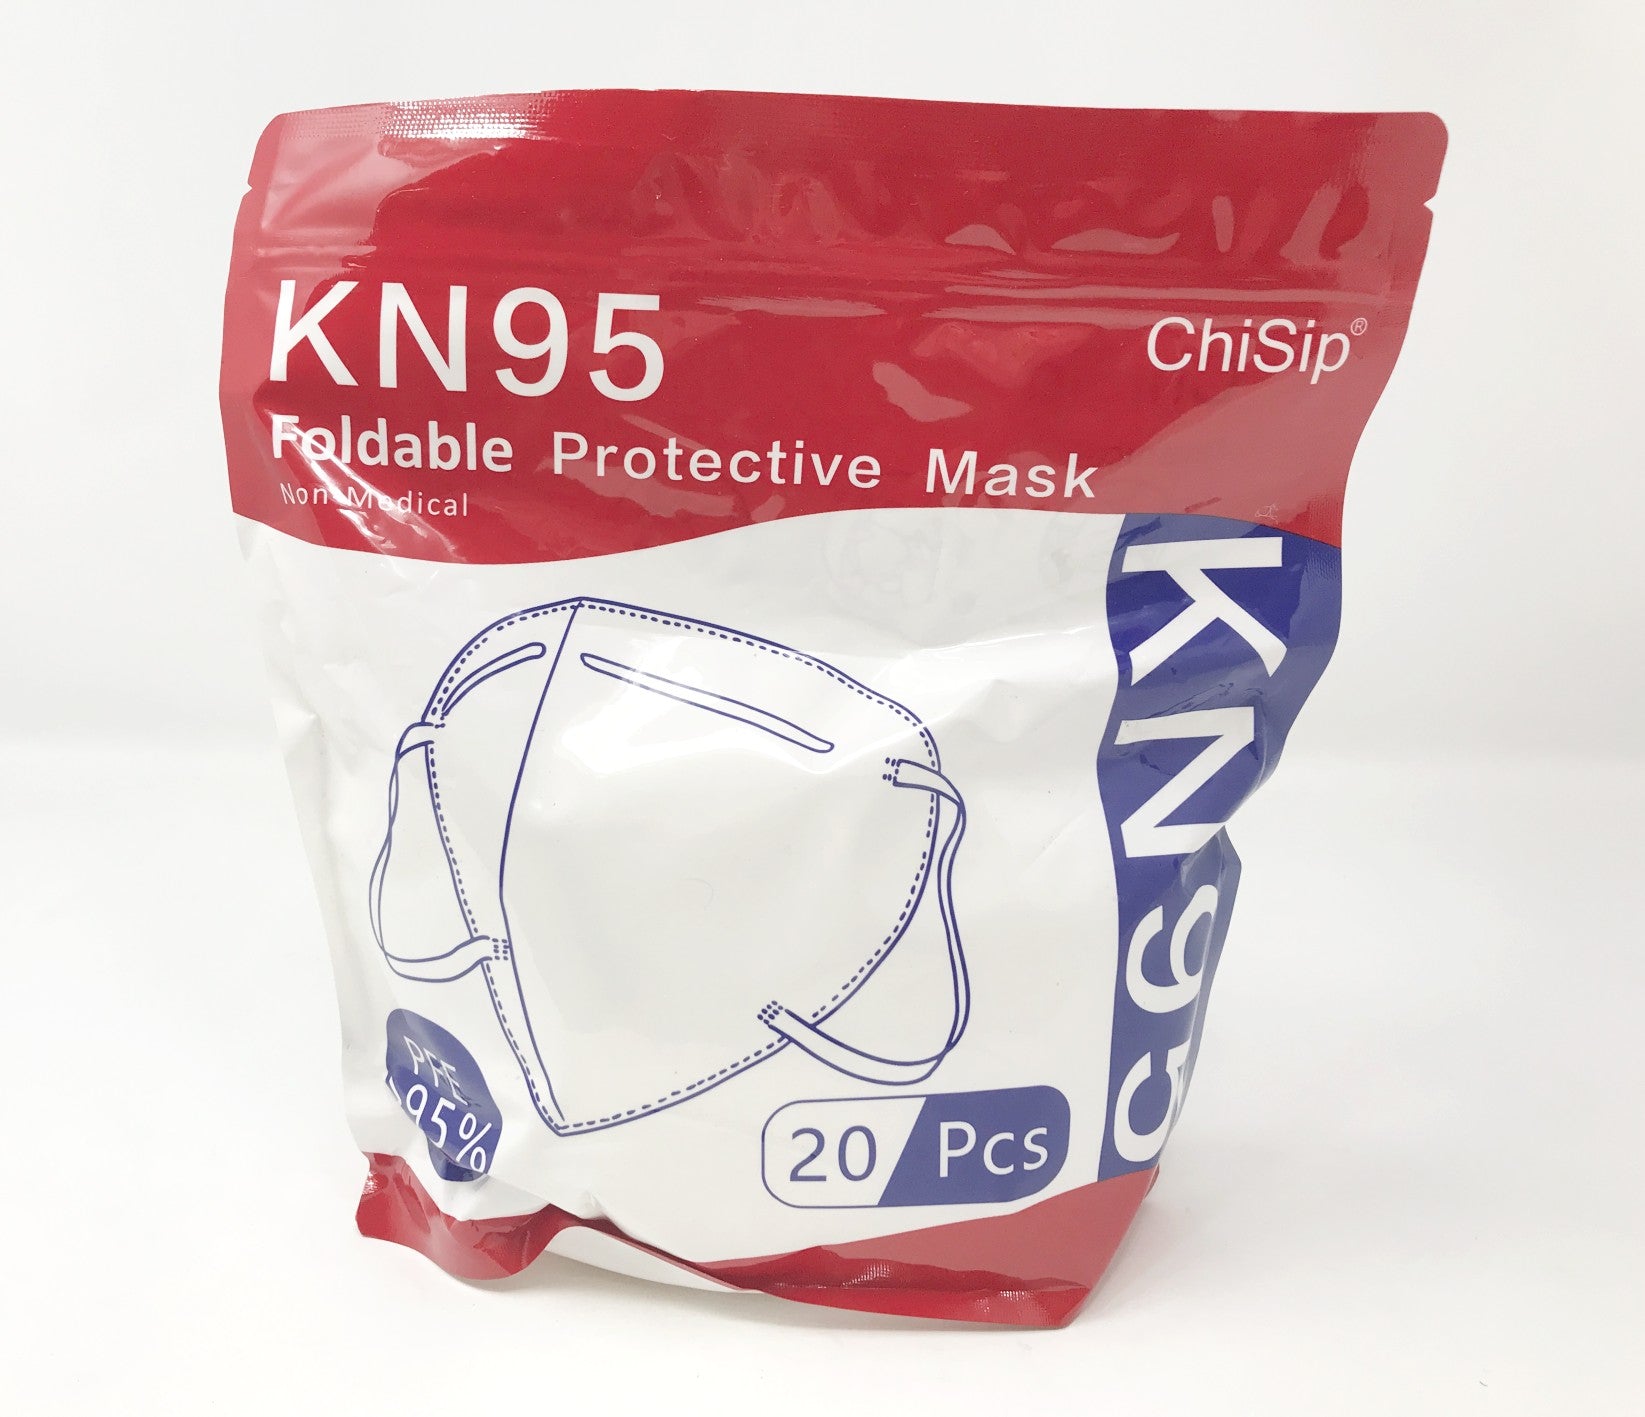 ChiSip Face Mask